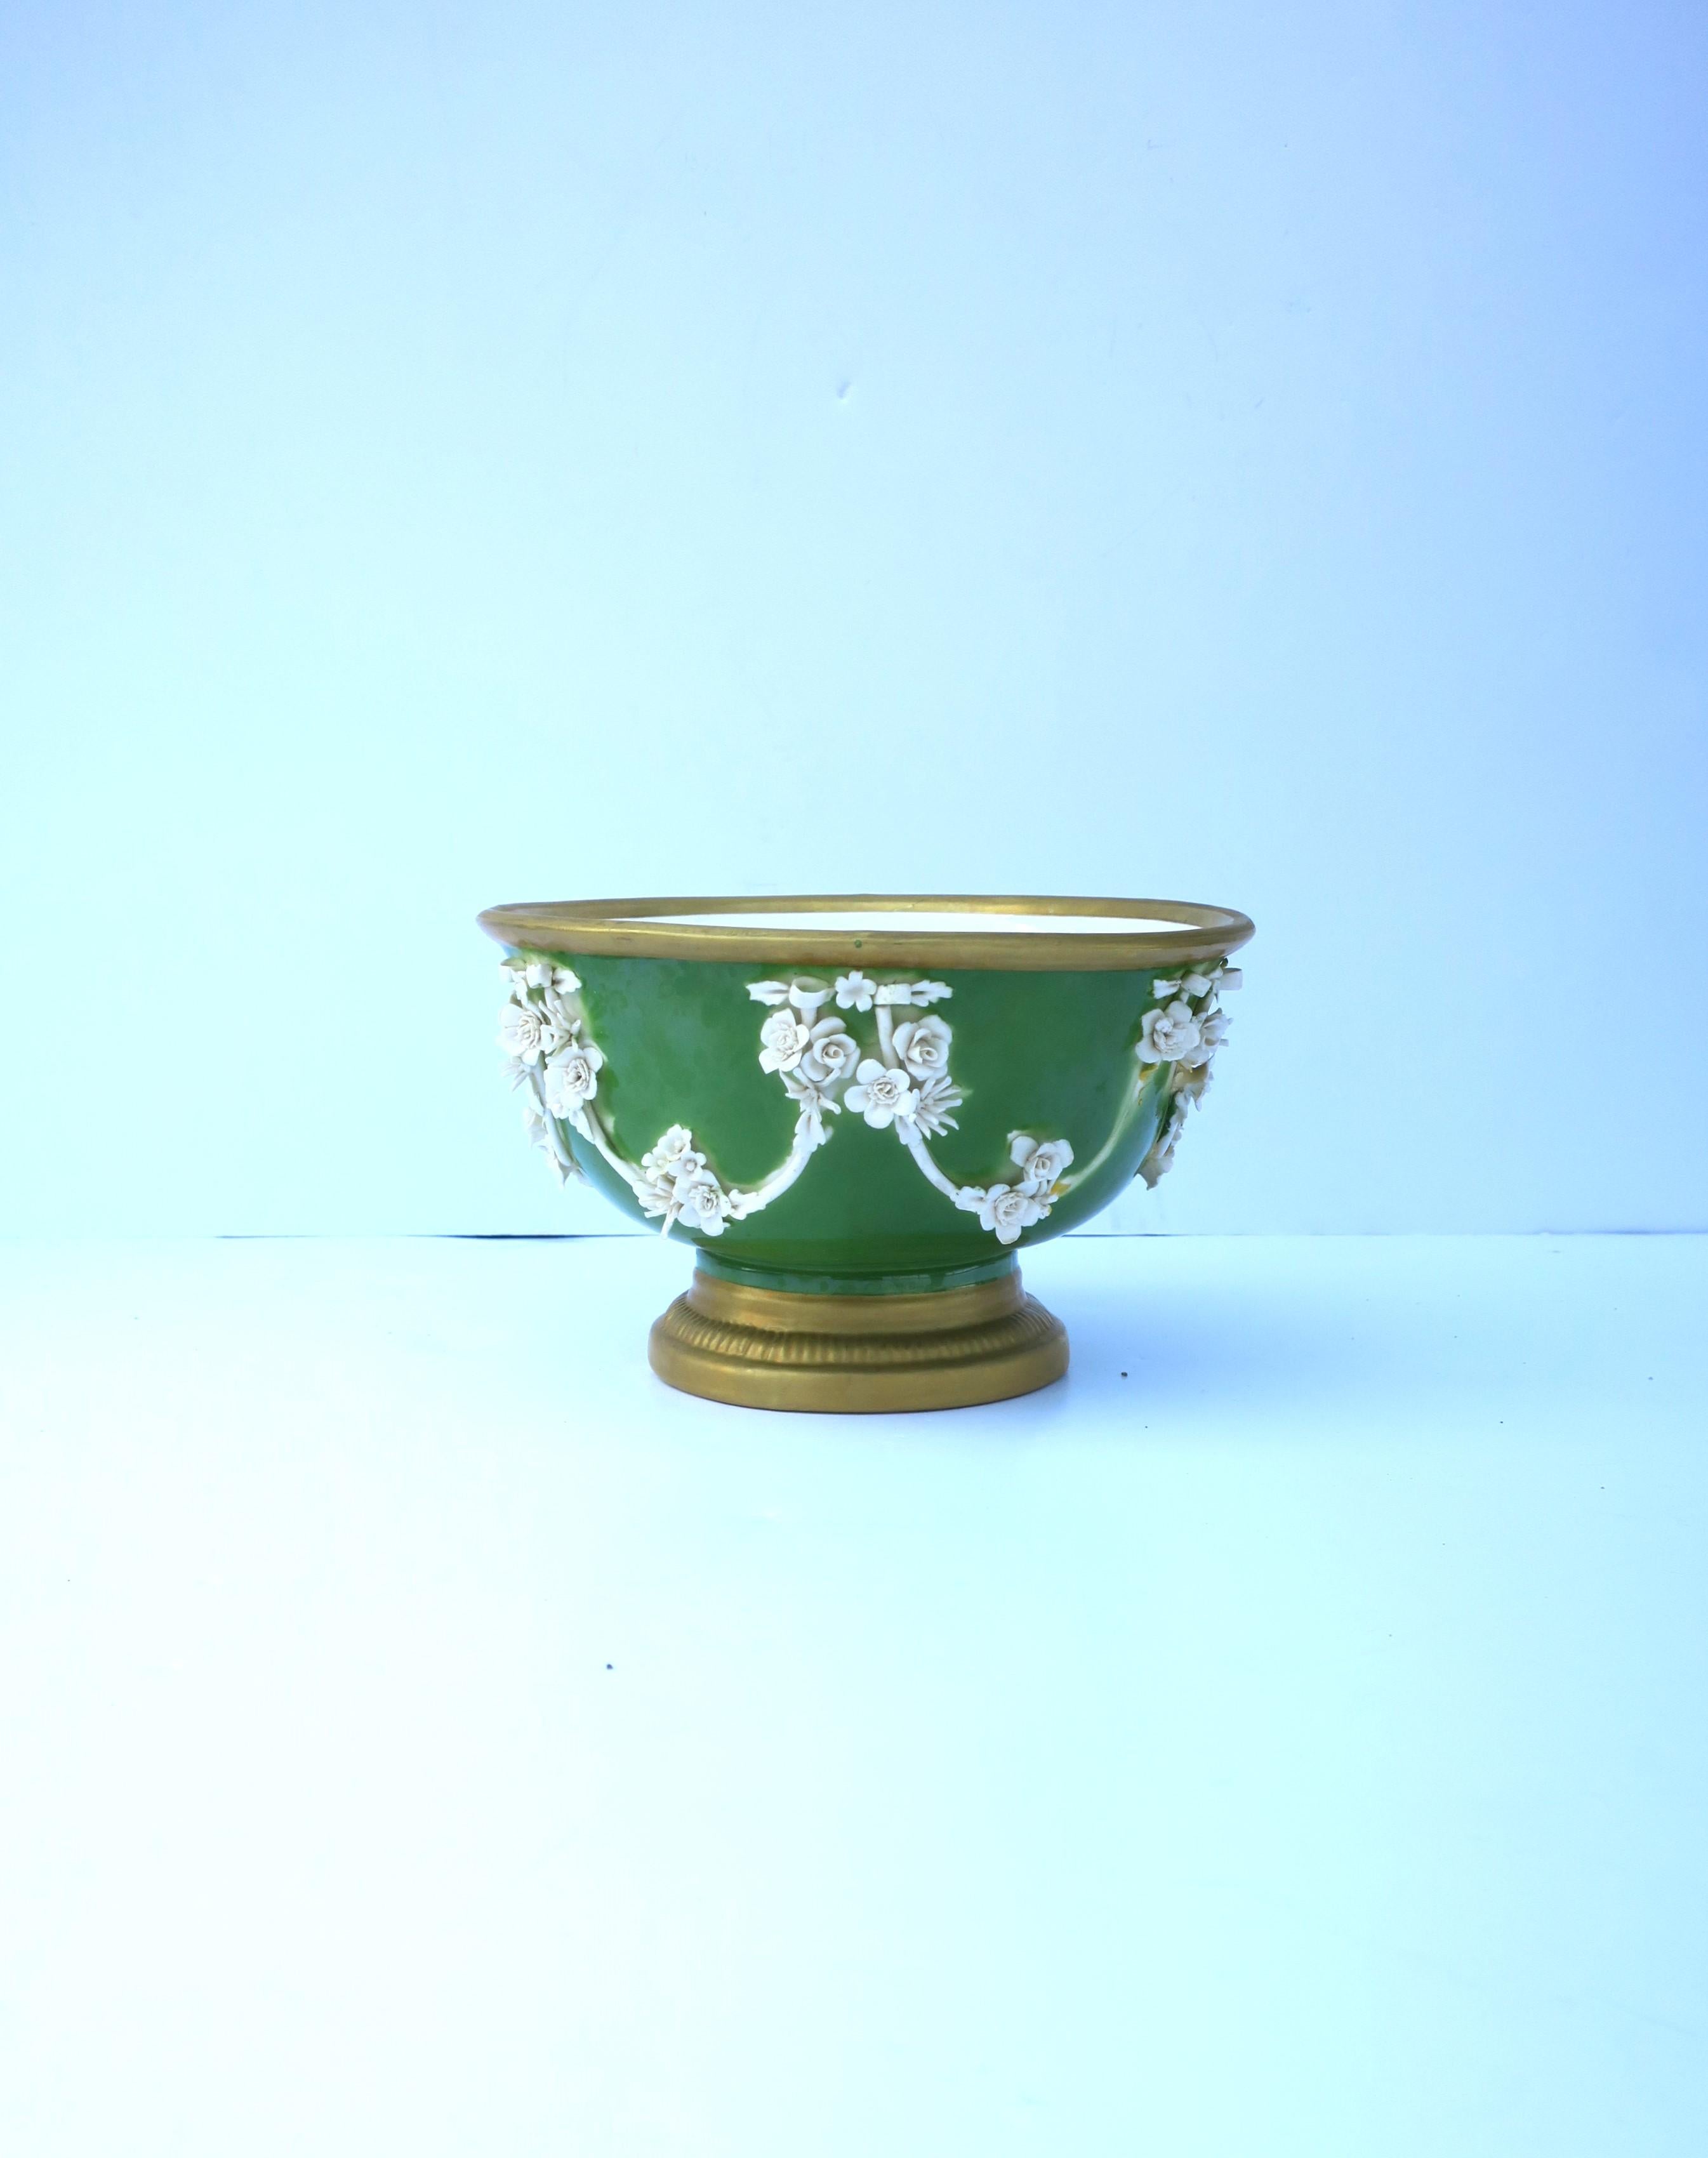 A beautiful Italian porcelain footed bowl urn by Mottahedeh, in the Neoclassical style, circa early-20th century, Italy. Beautiful as a standalone piece, cachepot jardiniere (demonstrated), etc. Piece has a green ground with white porcelain flowers